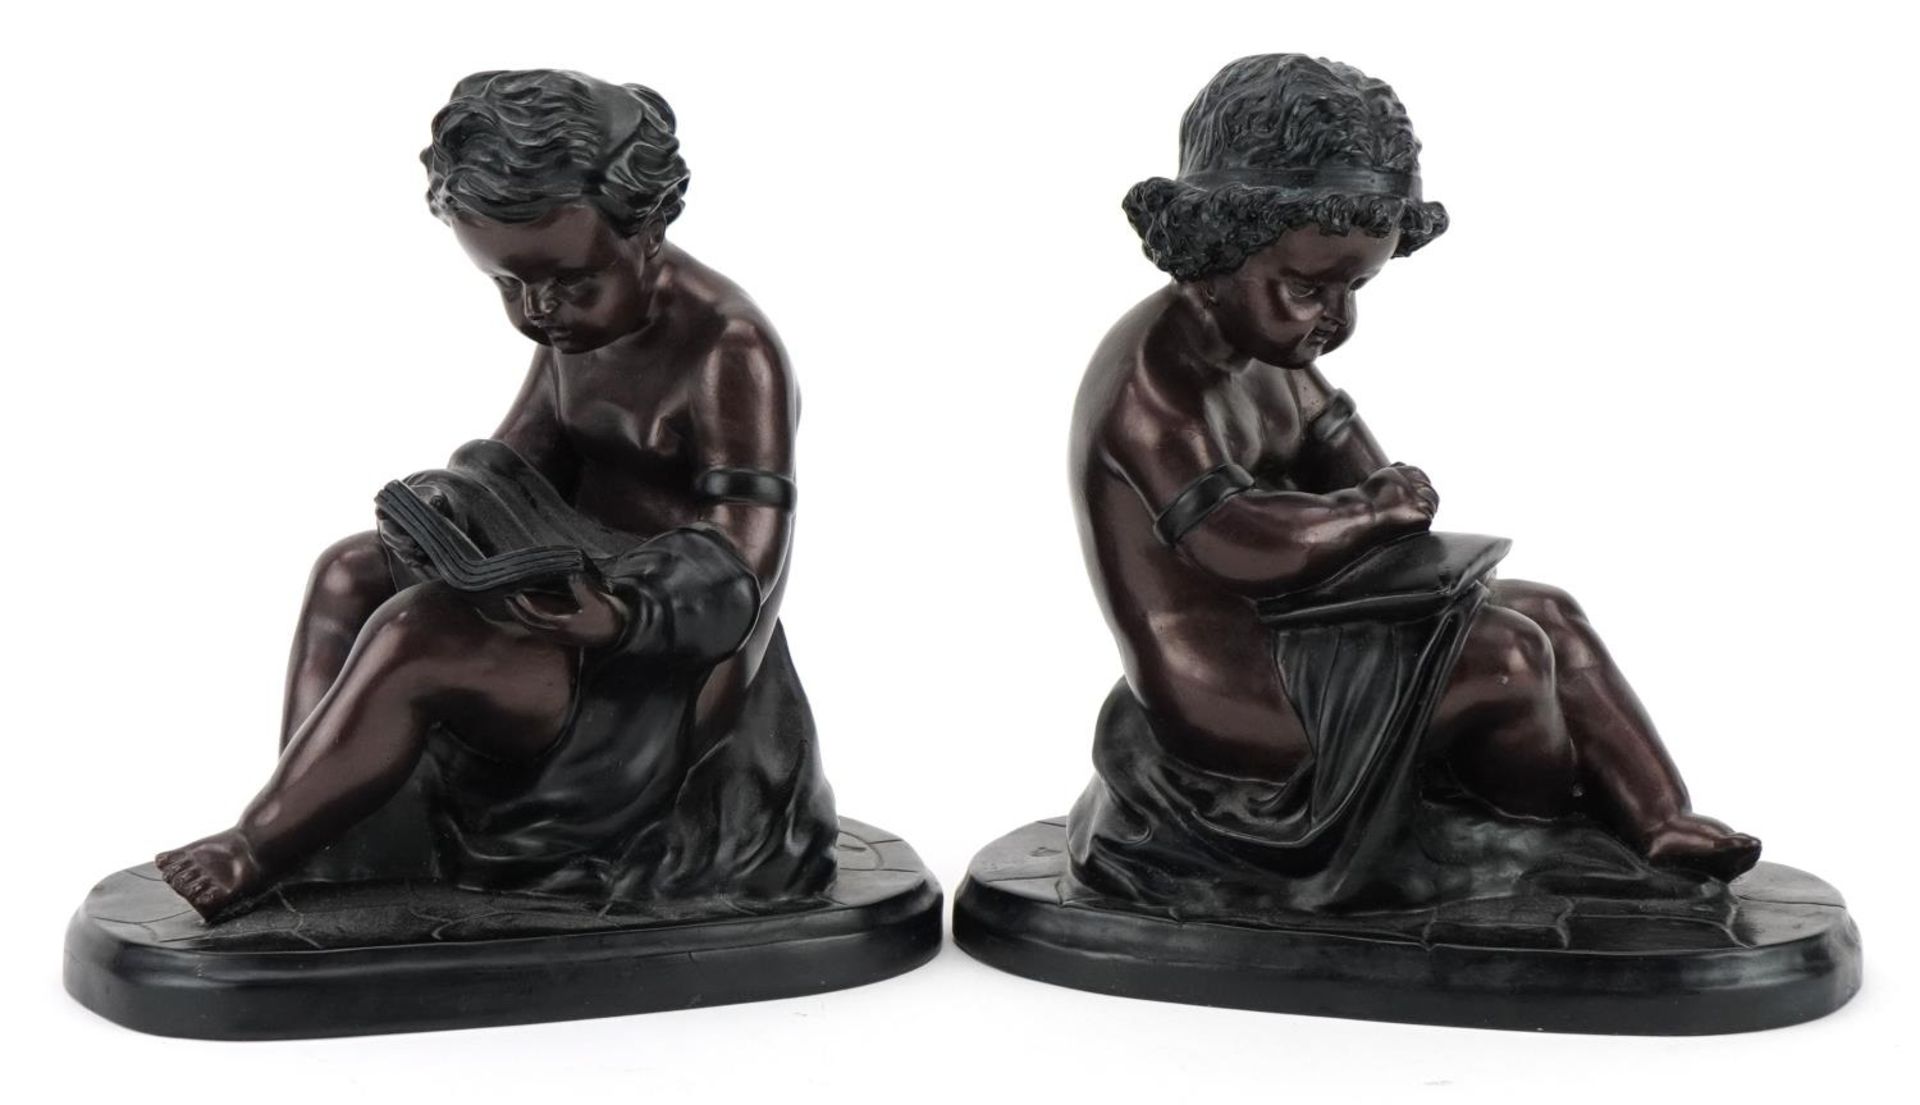 Pair of bronzed figures of nude children, each 18cm high : For further information on this lot